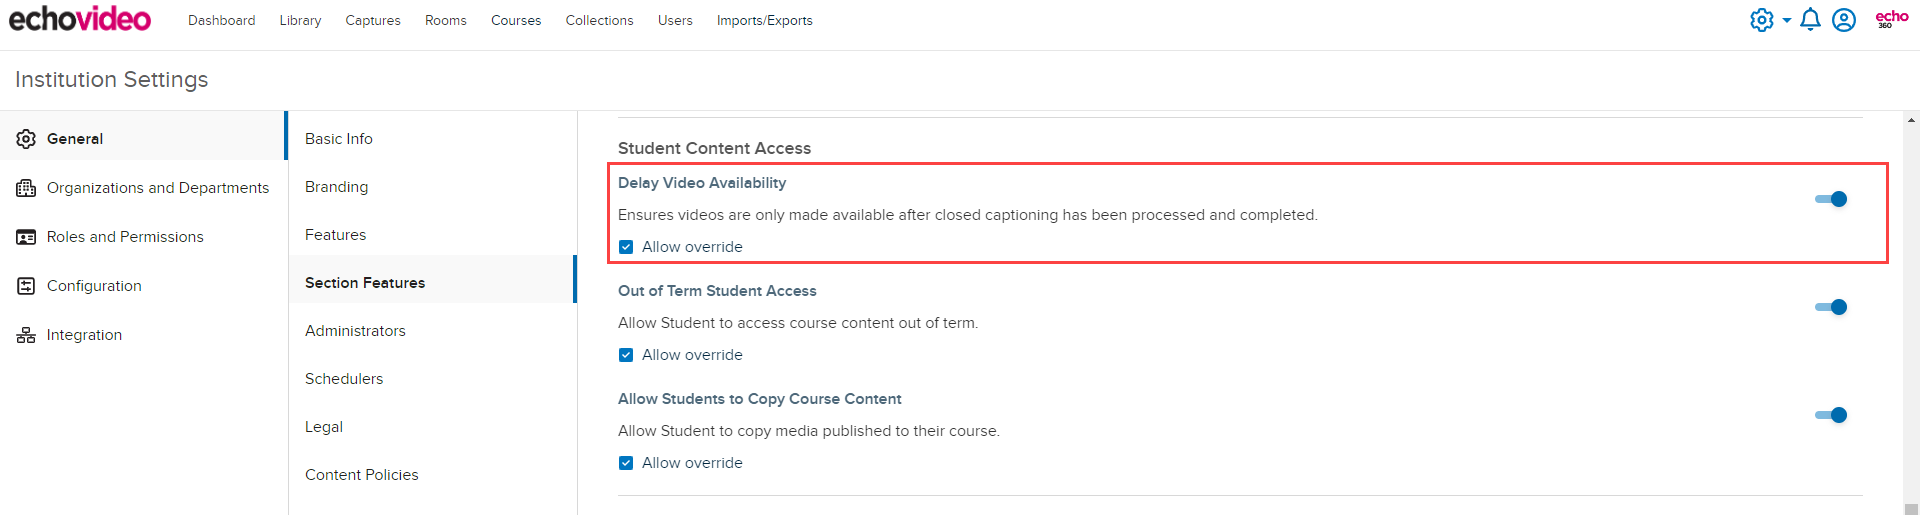 Institution Settings Section Features with Delay Video Availability under Student Content Access shown as described